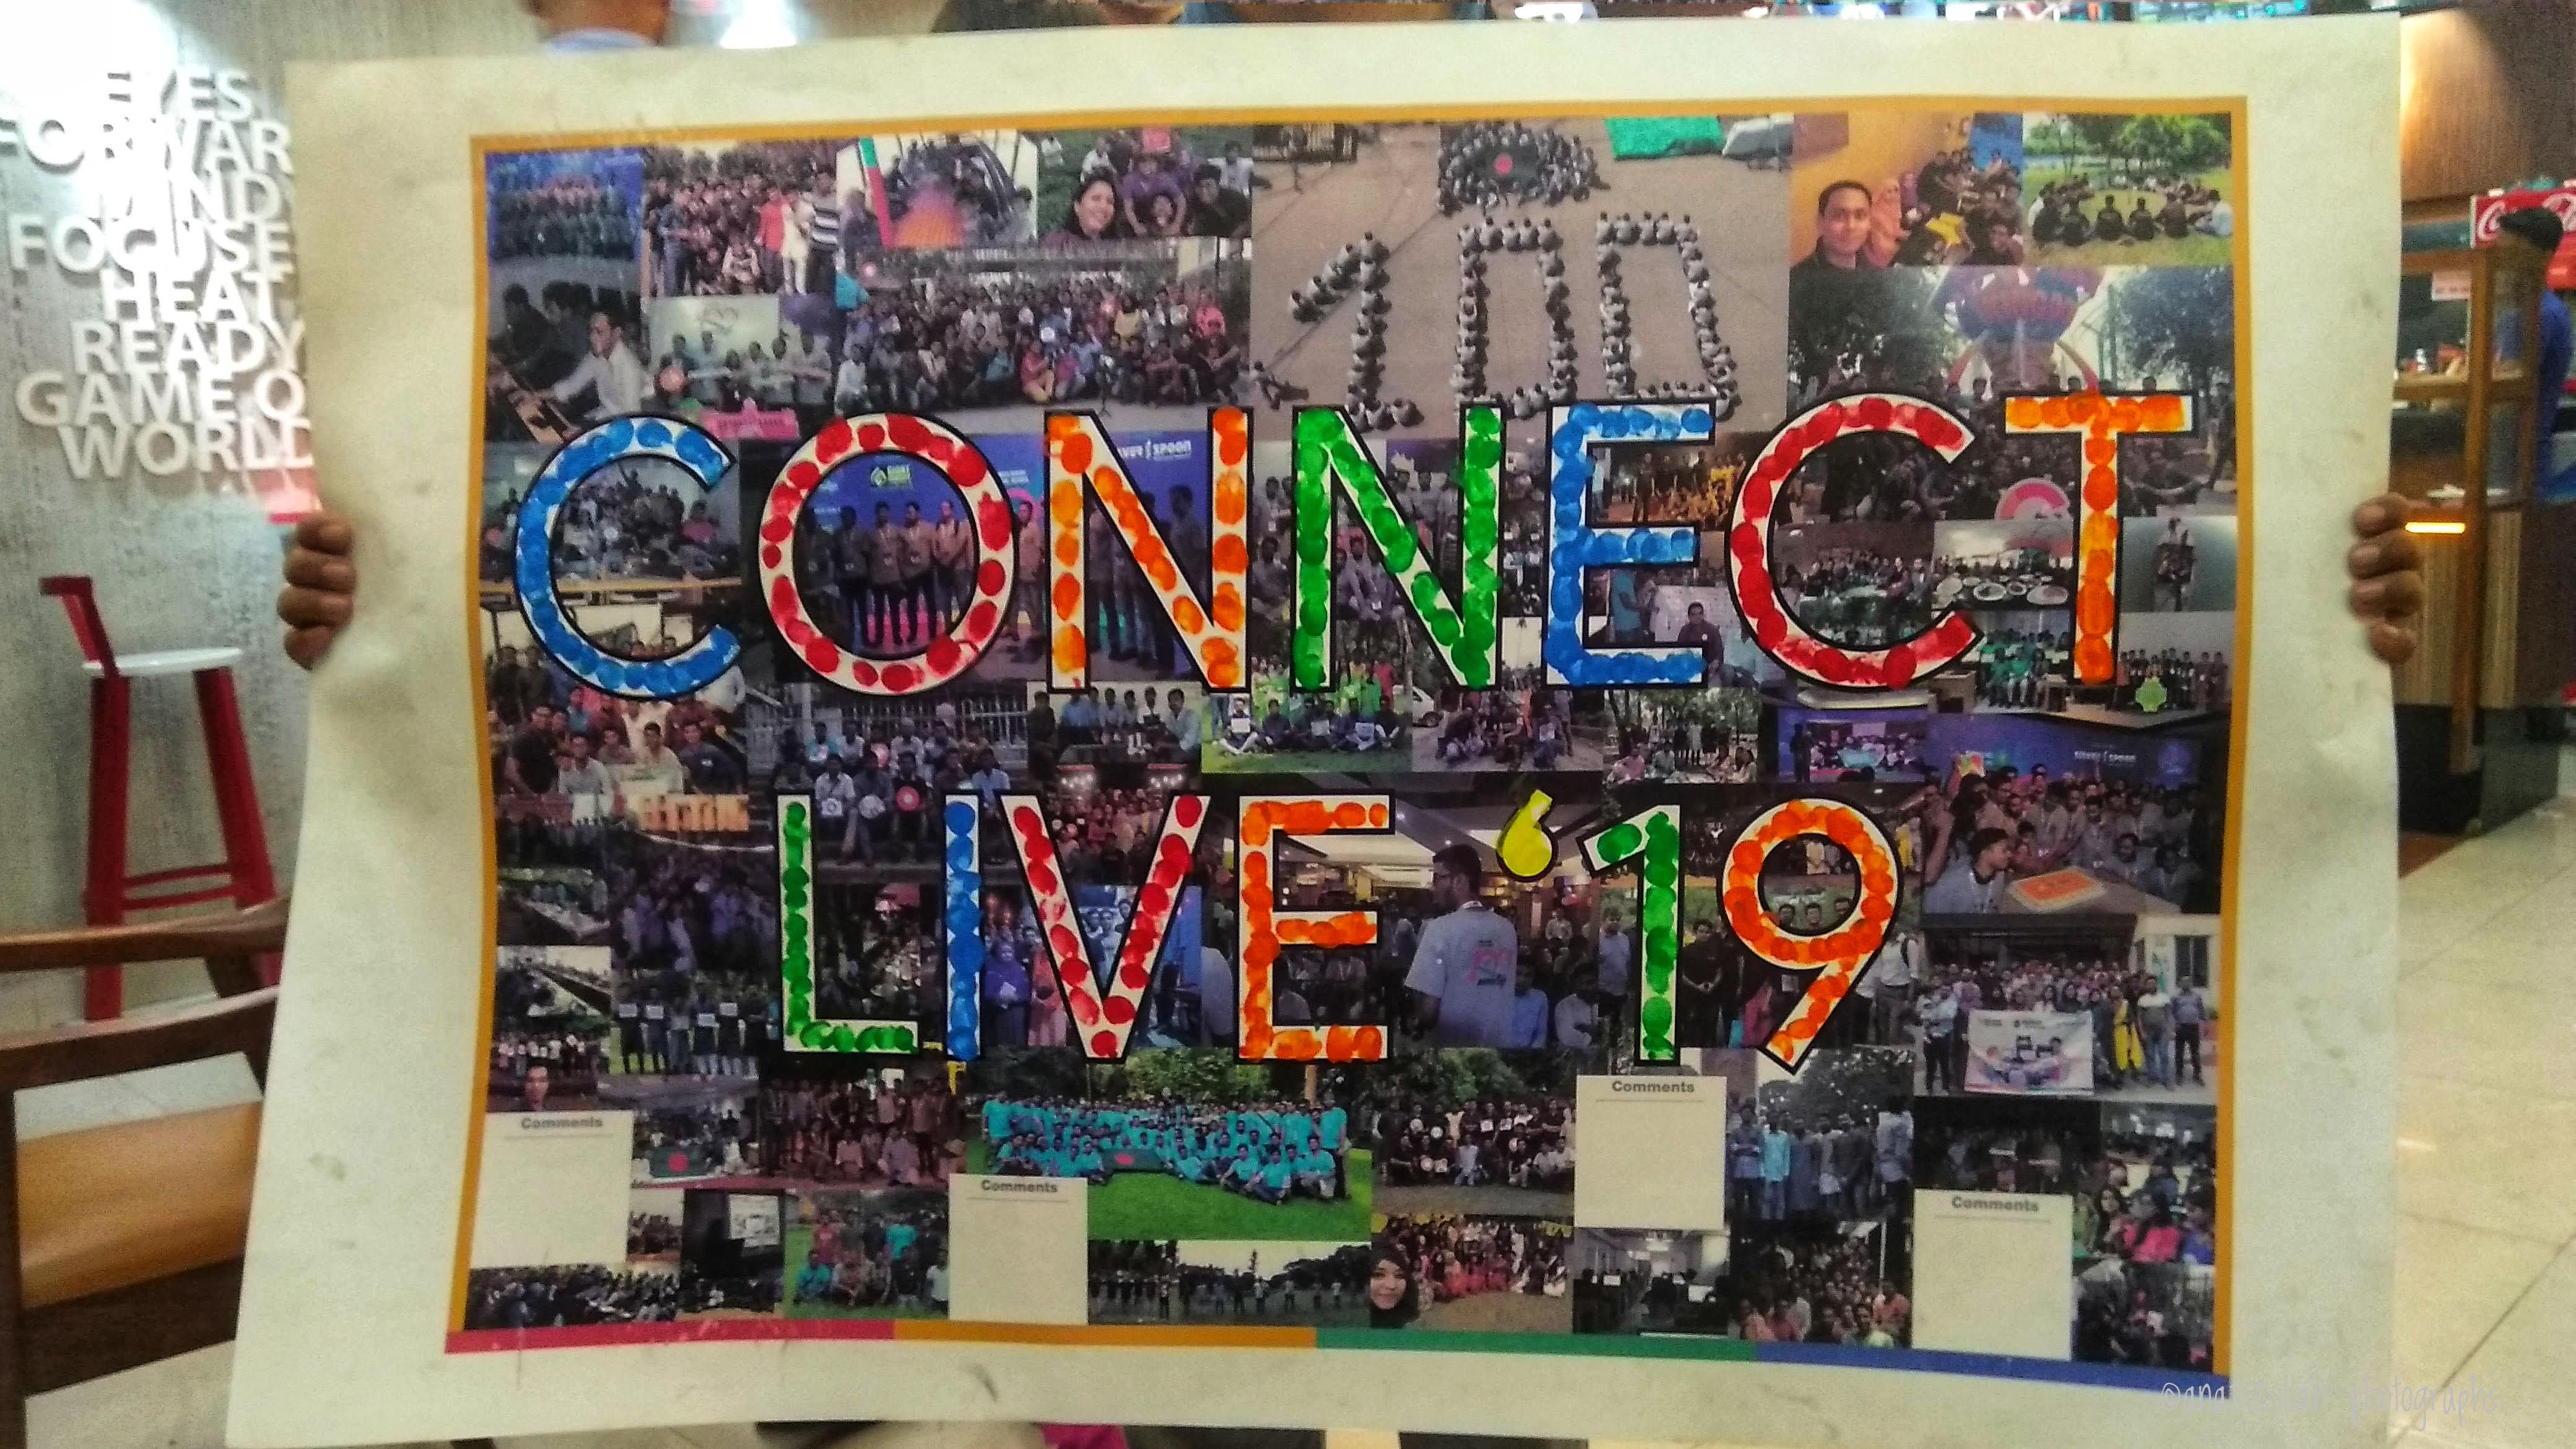 Connect live'19 wish board with fingerprints of BDLG members with lots of meetups photos on the background. Photo: Local guide Aziz Ullah